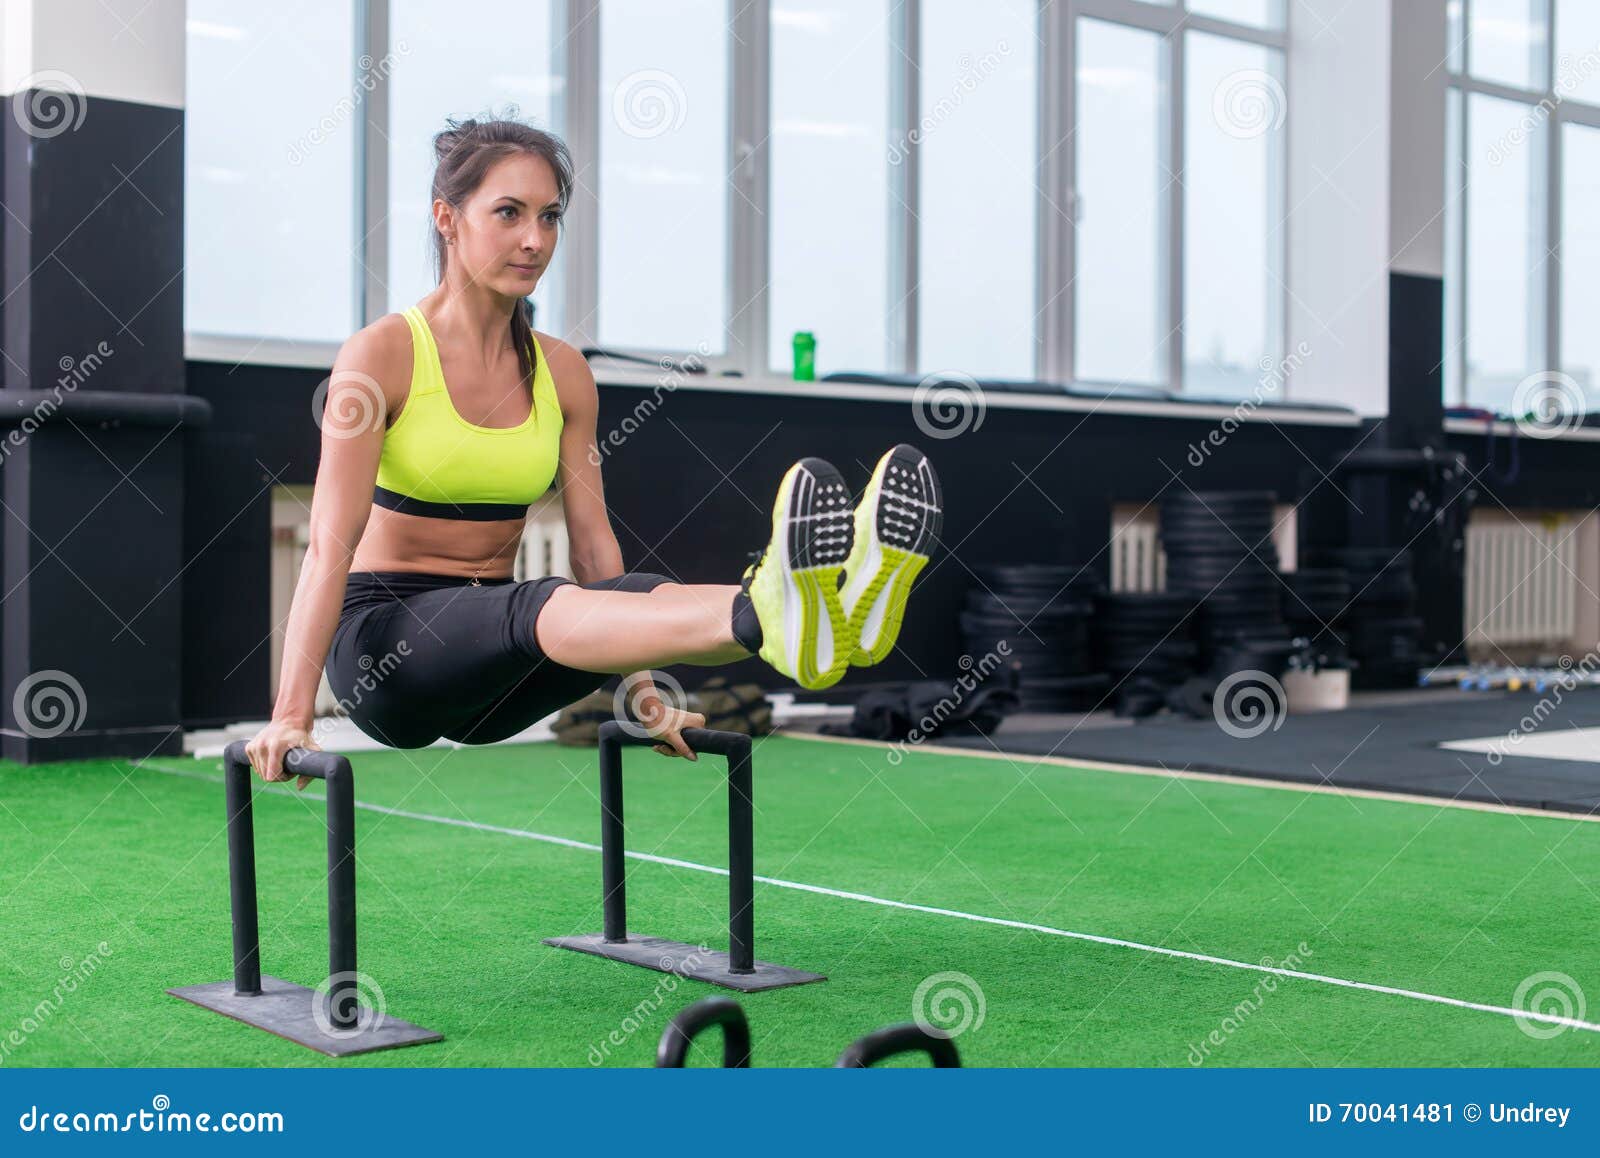 Fit Strong Woman Doing L-sits Work-out in Gym, Lifting Up Her Legs